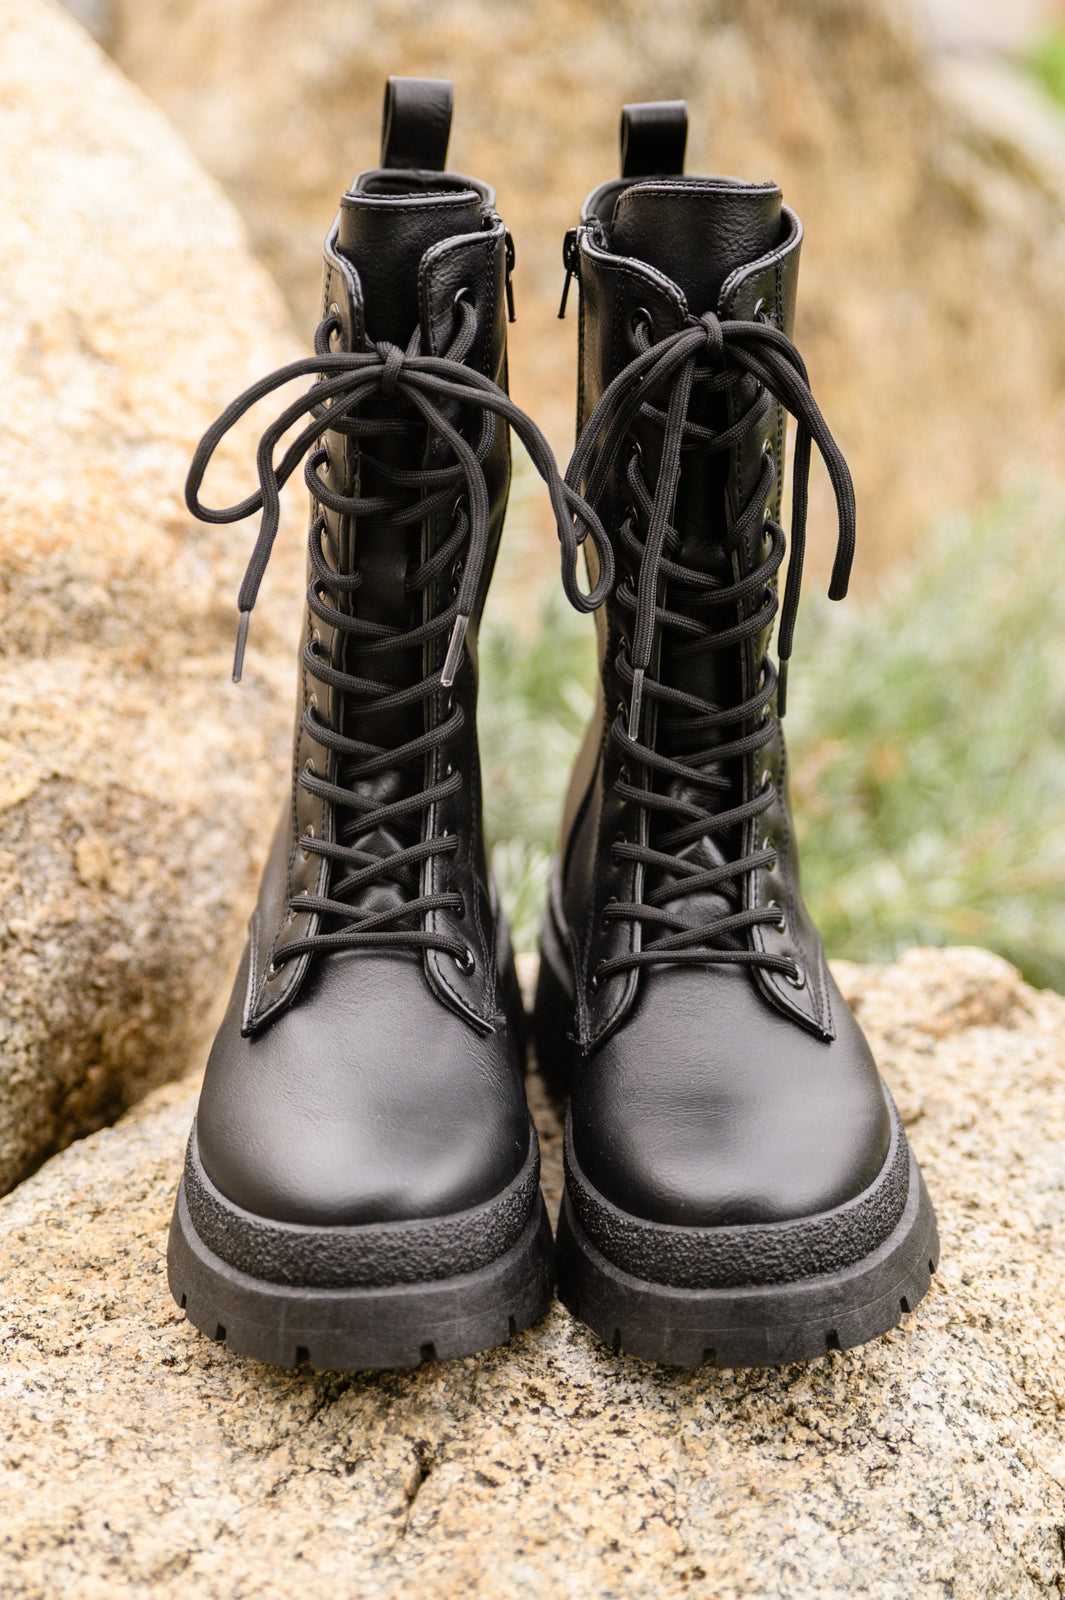 Fresh Feels Combat Boots In Black-Shoes-Inspired by Justeen-Women's Clothing Boutique in Chicago, Illinois